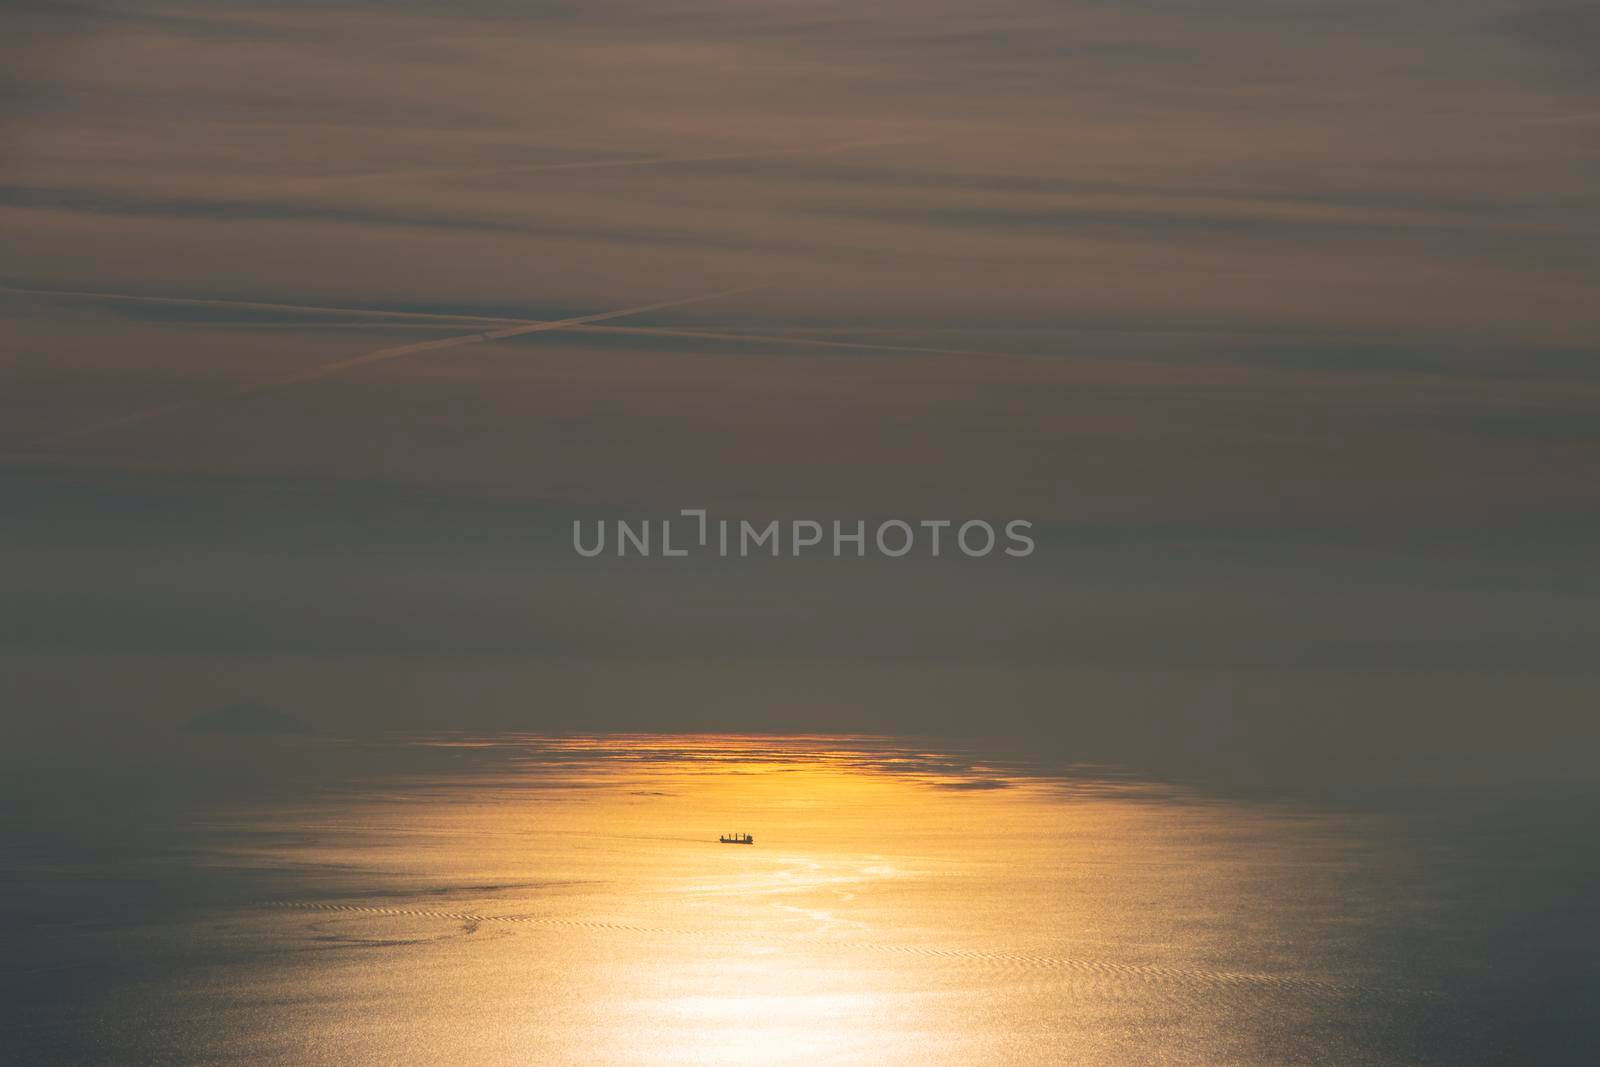 A ship in the middle of the ocean lit up by orange sunlight on water by StefanMal